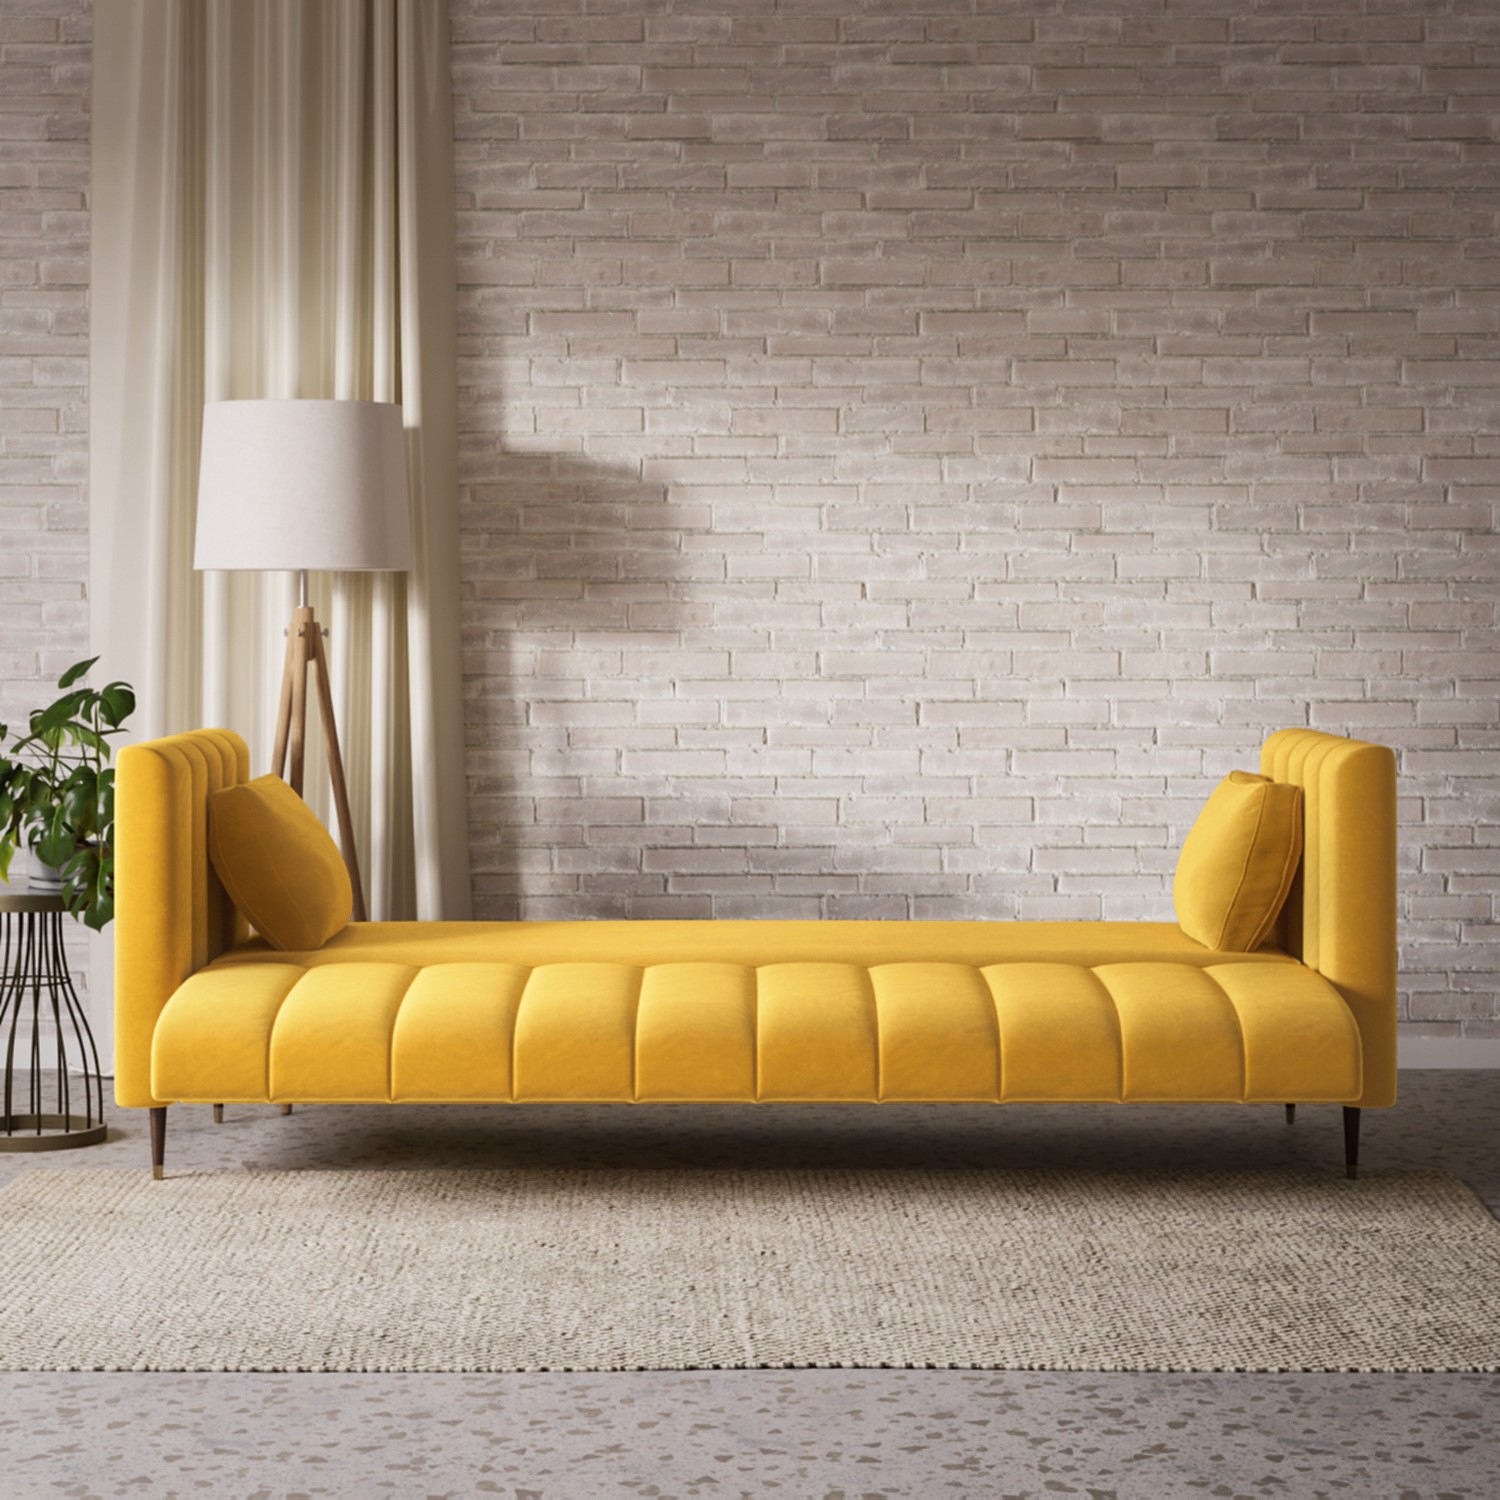 Read more about Yellow velvet click clack sofa bed seats 3 mabel